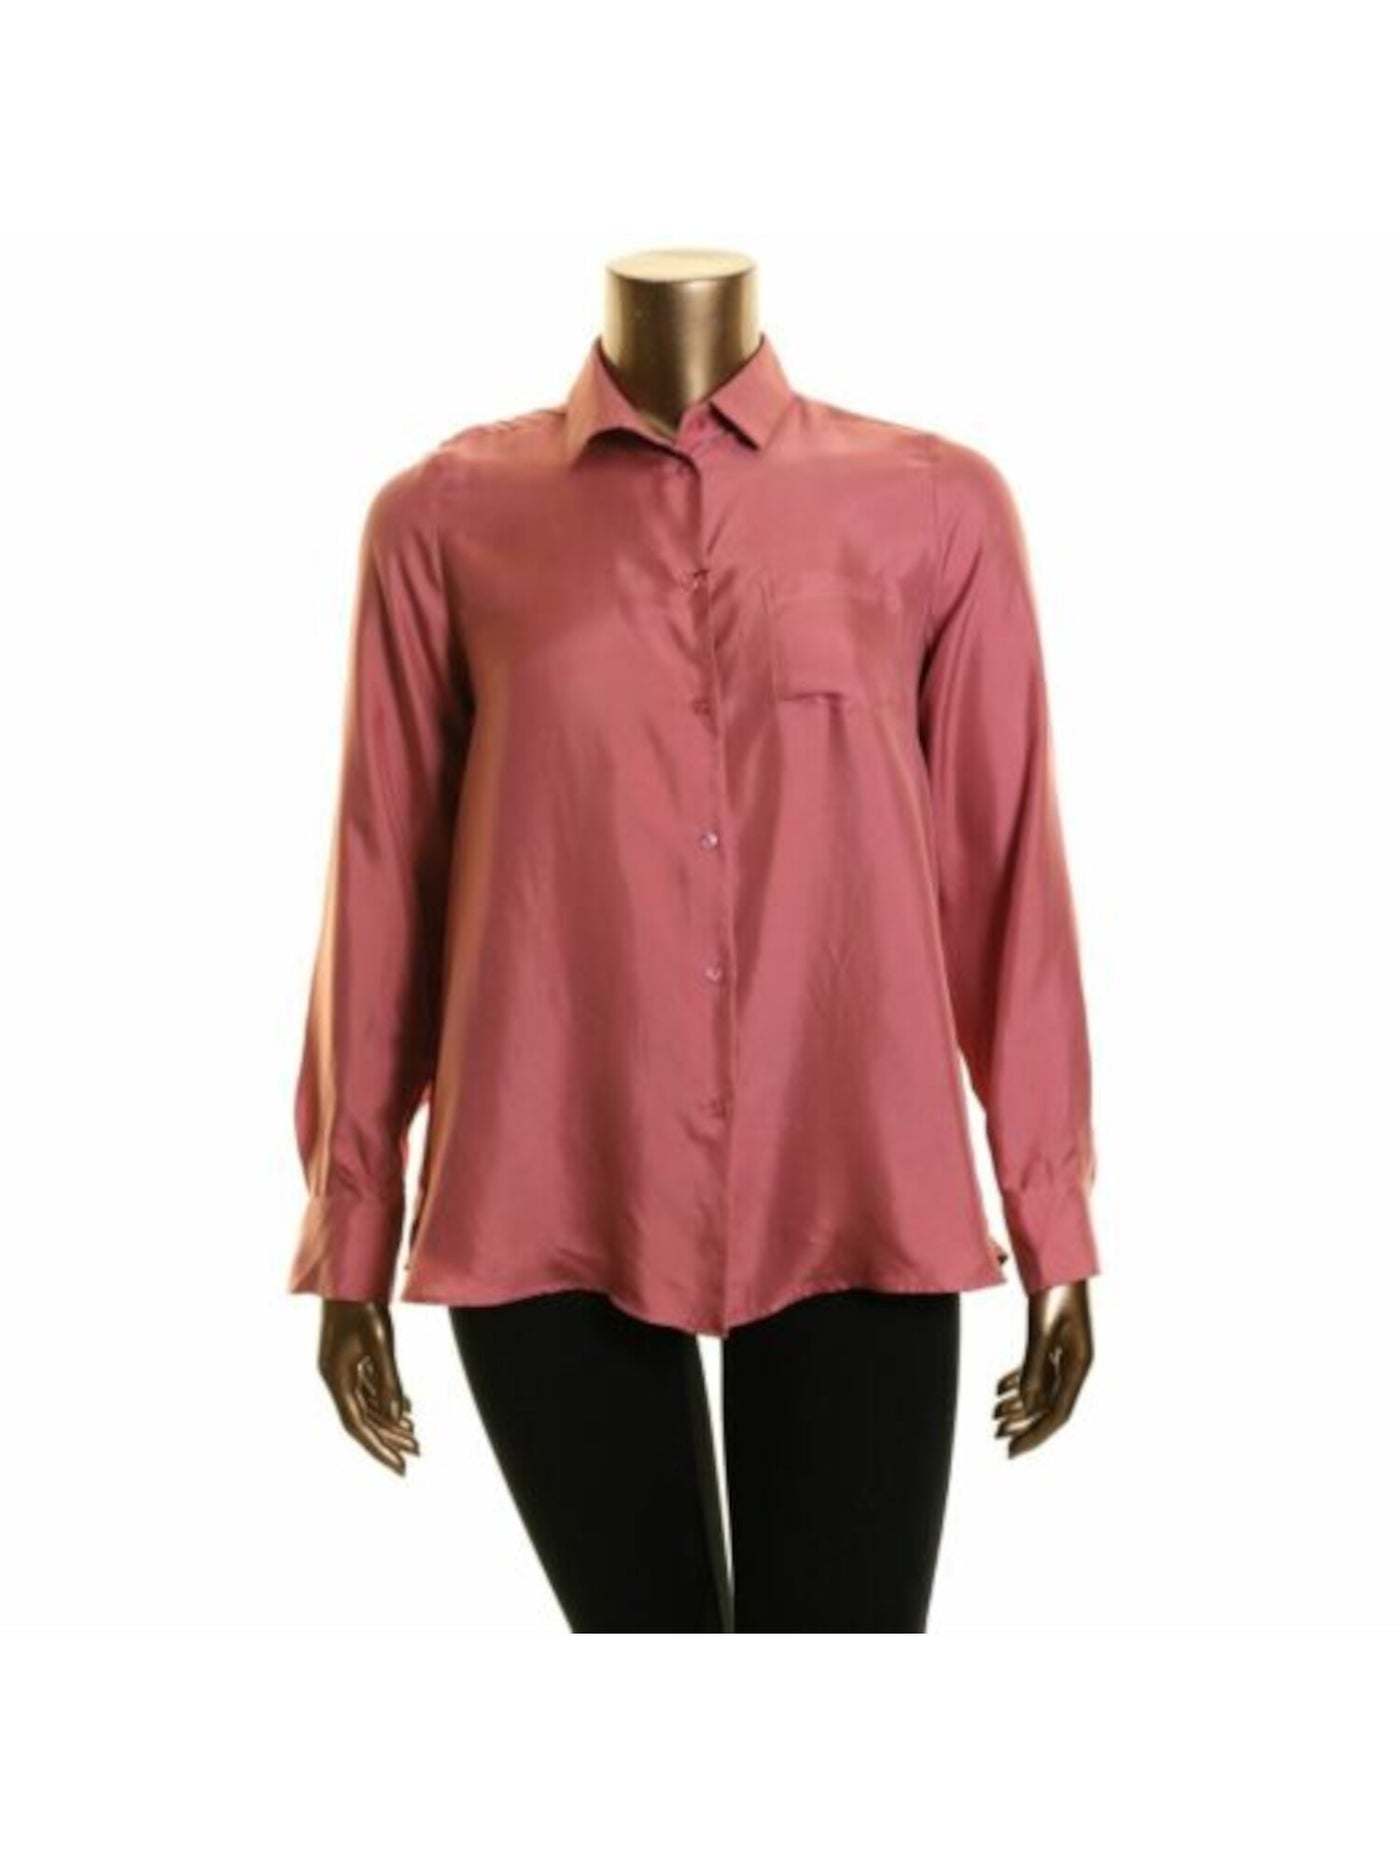 MAXMARA Womens Pink Pocketed Cuffed Sleeve Button Up Top 4